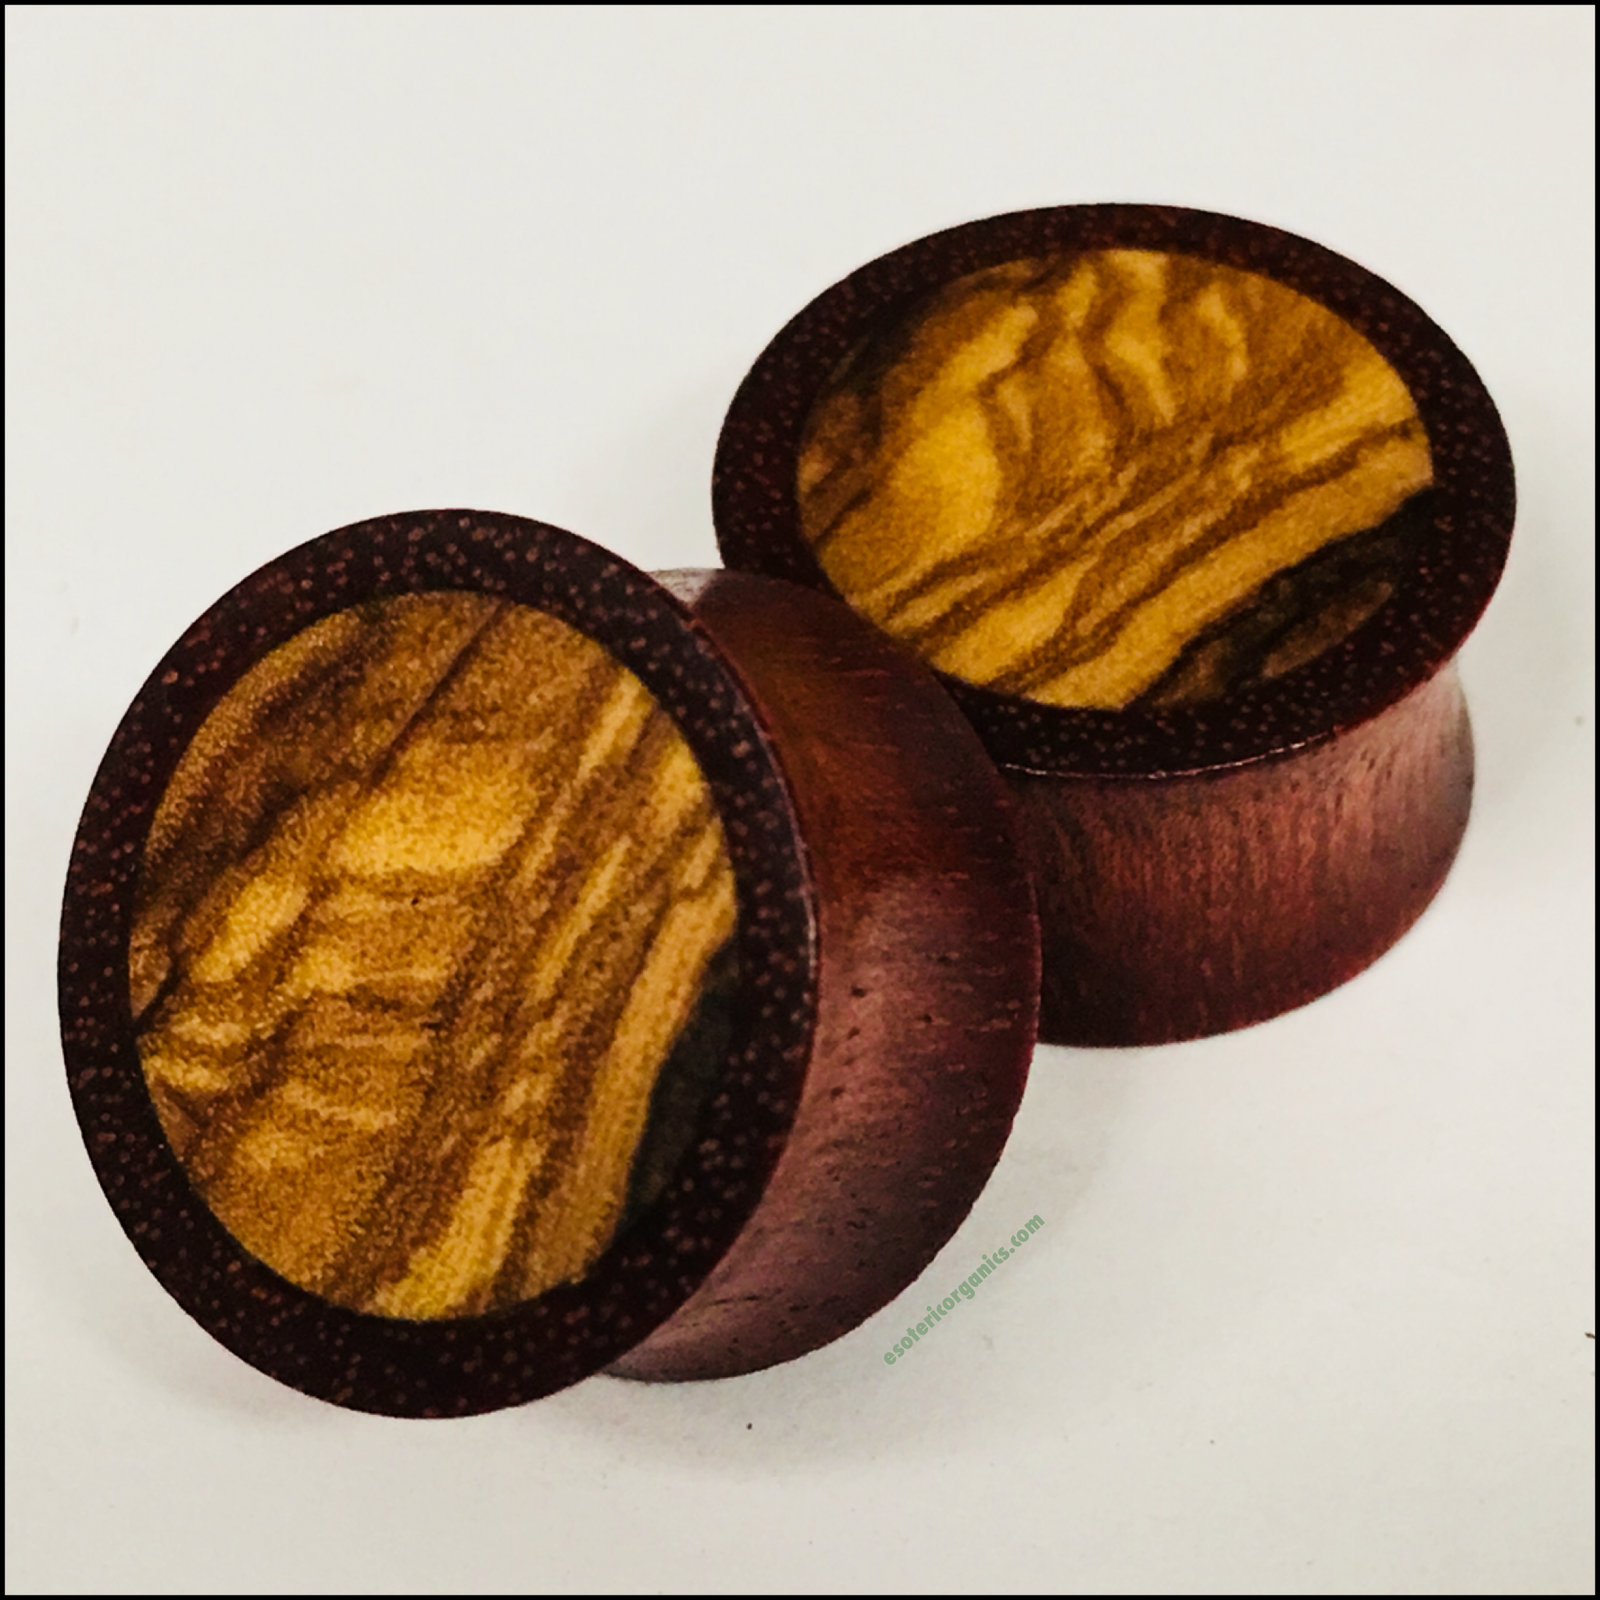 Bloodwood Olivewood Solid Round Plugs